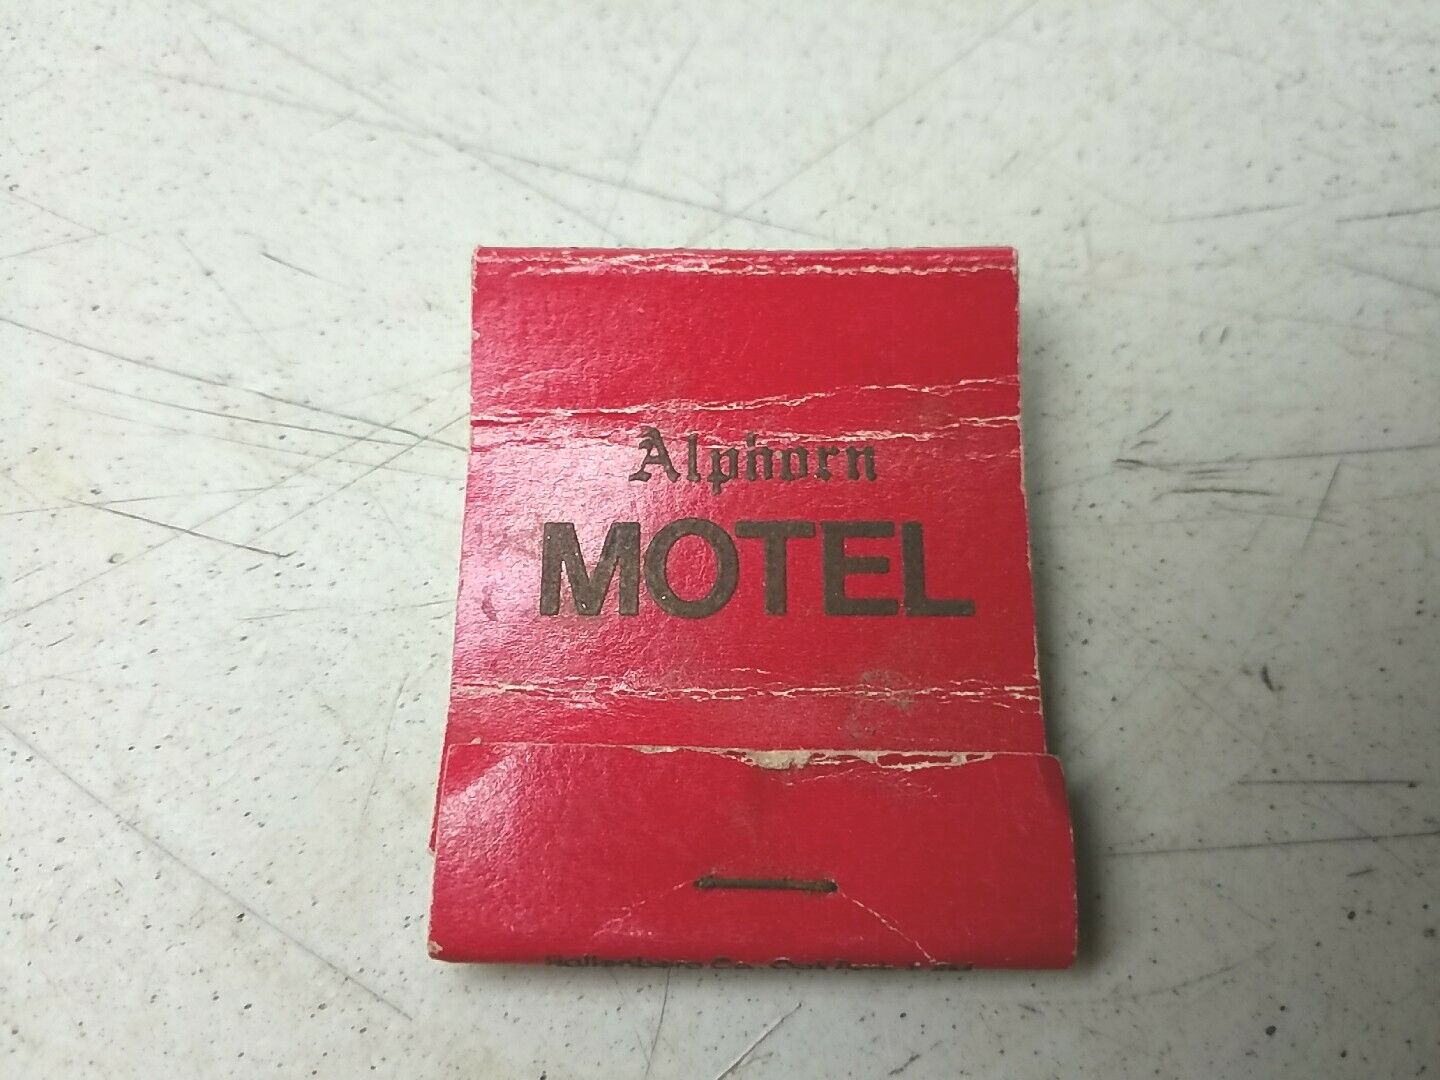 Alphorn Motel AAA Approved Monroe Wisconsin Vintage Matchbook Cover Advertising 